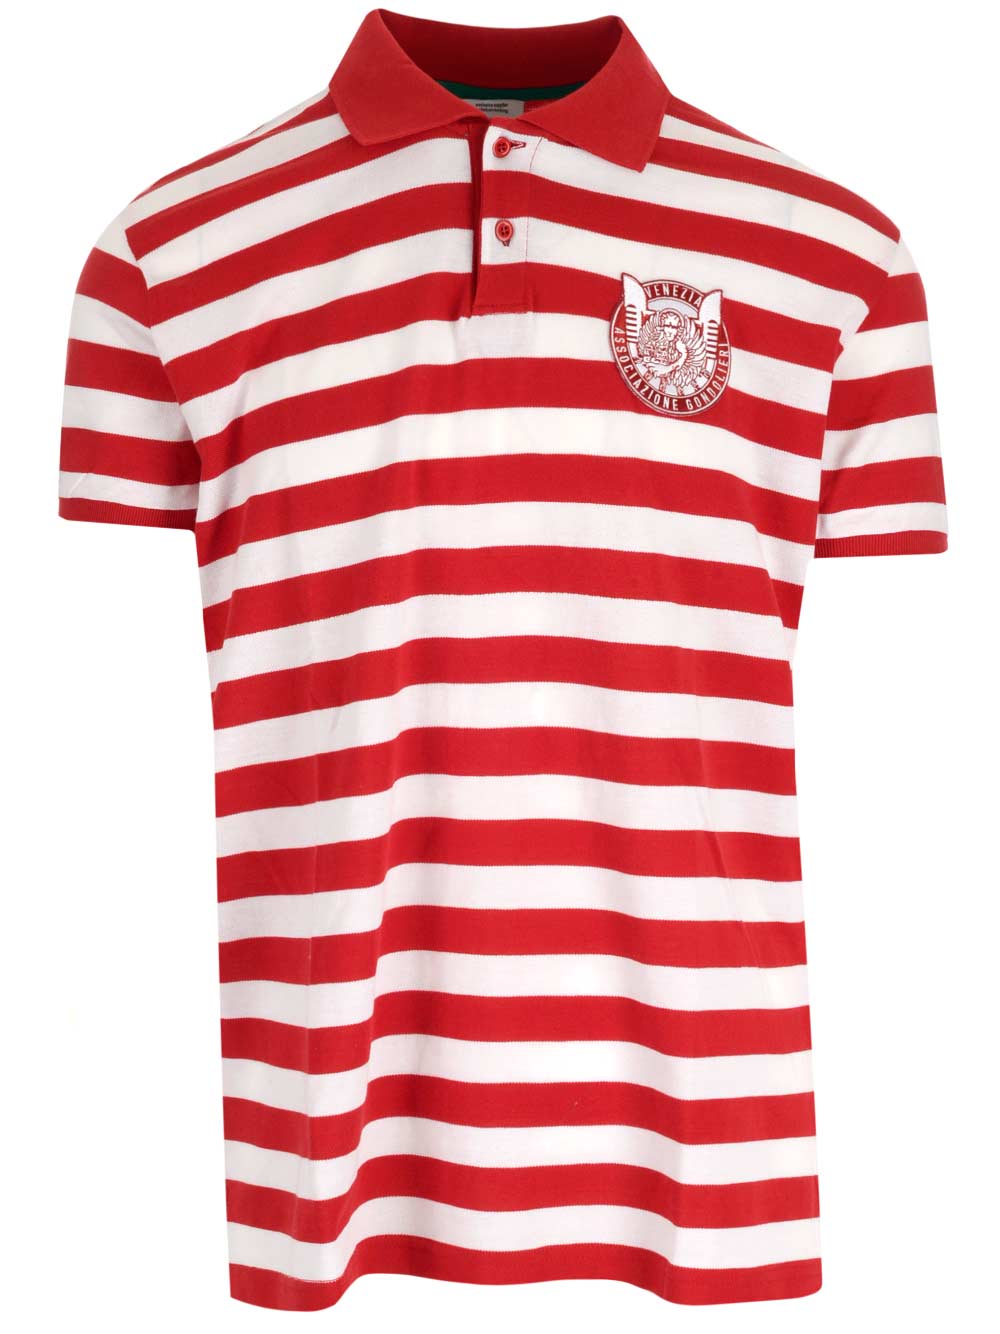 Red gondolier polo shirt